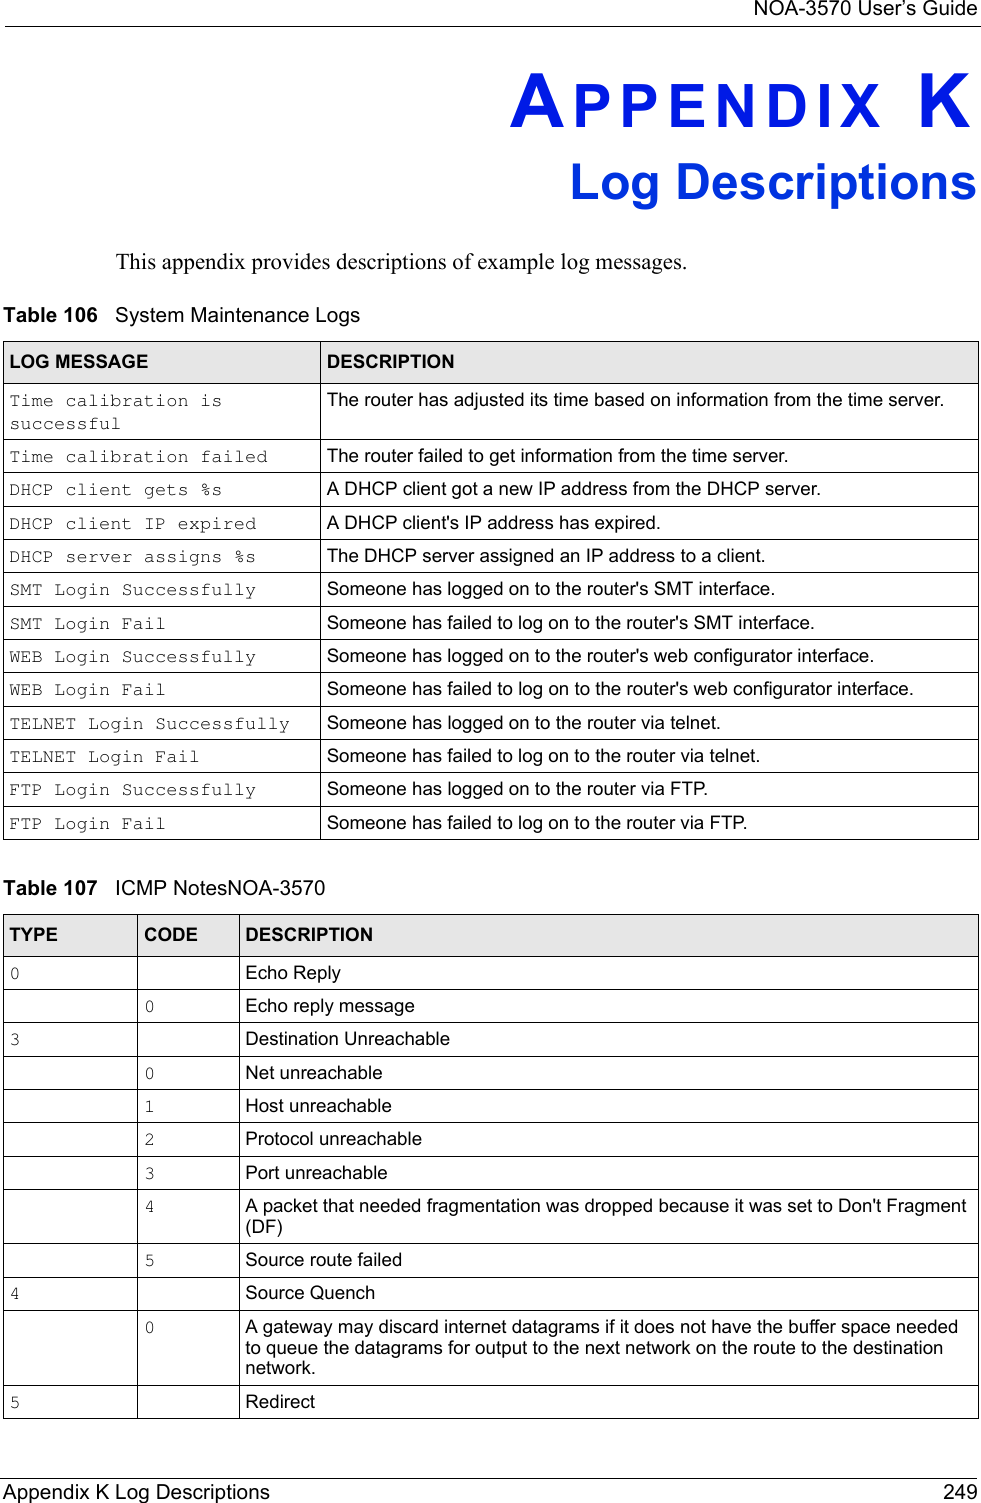 NOA-3570 User’s GuideAppendix K Log Descriptions 249APPENDIX KLog DescriptionsThis appendix provides descriptions of example log messages.Table 106   System Maintenance LogsLOG MESSAGE DESCRIPTIONTime calibration is successfulThe router has adjusted its time based on information from the time server.Time calibration failed The router failed to get information from the time server.DHCP client gets %s A DHCP client got a new IP address from the DHCP server.DHCP client IP expired A DHCP client&apos;s IP address has expired.DHCP server assigns %s The DHCP server assigned an IP address to a client.SMT Login Successfully Someone has logged on to the router&apos;s SMT interface.SMT Login Fail Someone has failed to log on to the router&apos;s SMT interface.WEB Login Successfully Someone has logged on to the router&apos;s web configurator interface.WEB Login Fail Someone has failed to log on to the router&apos;s web configurator interface.TELNET Login Successfully Someone has logged on to the router via telnet.TELNET Login Fail Someone has failed to log on to the router via telnet.FTP Login Successfully Someone has logged on to the router via FTP.FTP Login Fail Someone has failed to log on to the router via FTP.Table 107   ICMP NotesNOA-3570TYPE CODE DESCRIPTION0Echo Reply0Echo reply message3Destination Unreachable0Net unreachable1Host unreachable2Protocol unreachable3Port unreachable4A packet that needed fragmentation was dropped because it was set to Don&apos;t Fragment (DF)5Source route failed4Source Quench0A gateway may discard internet datagrams if it does not have the buffer space needed to queue the datagrams for output to the next network on the route to the destination network.5Redirect